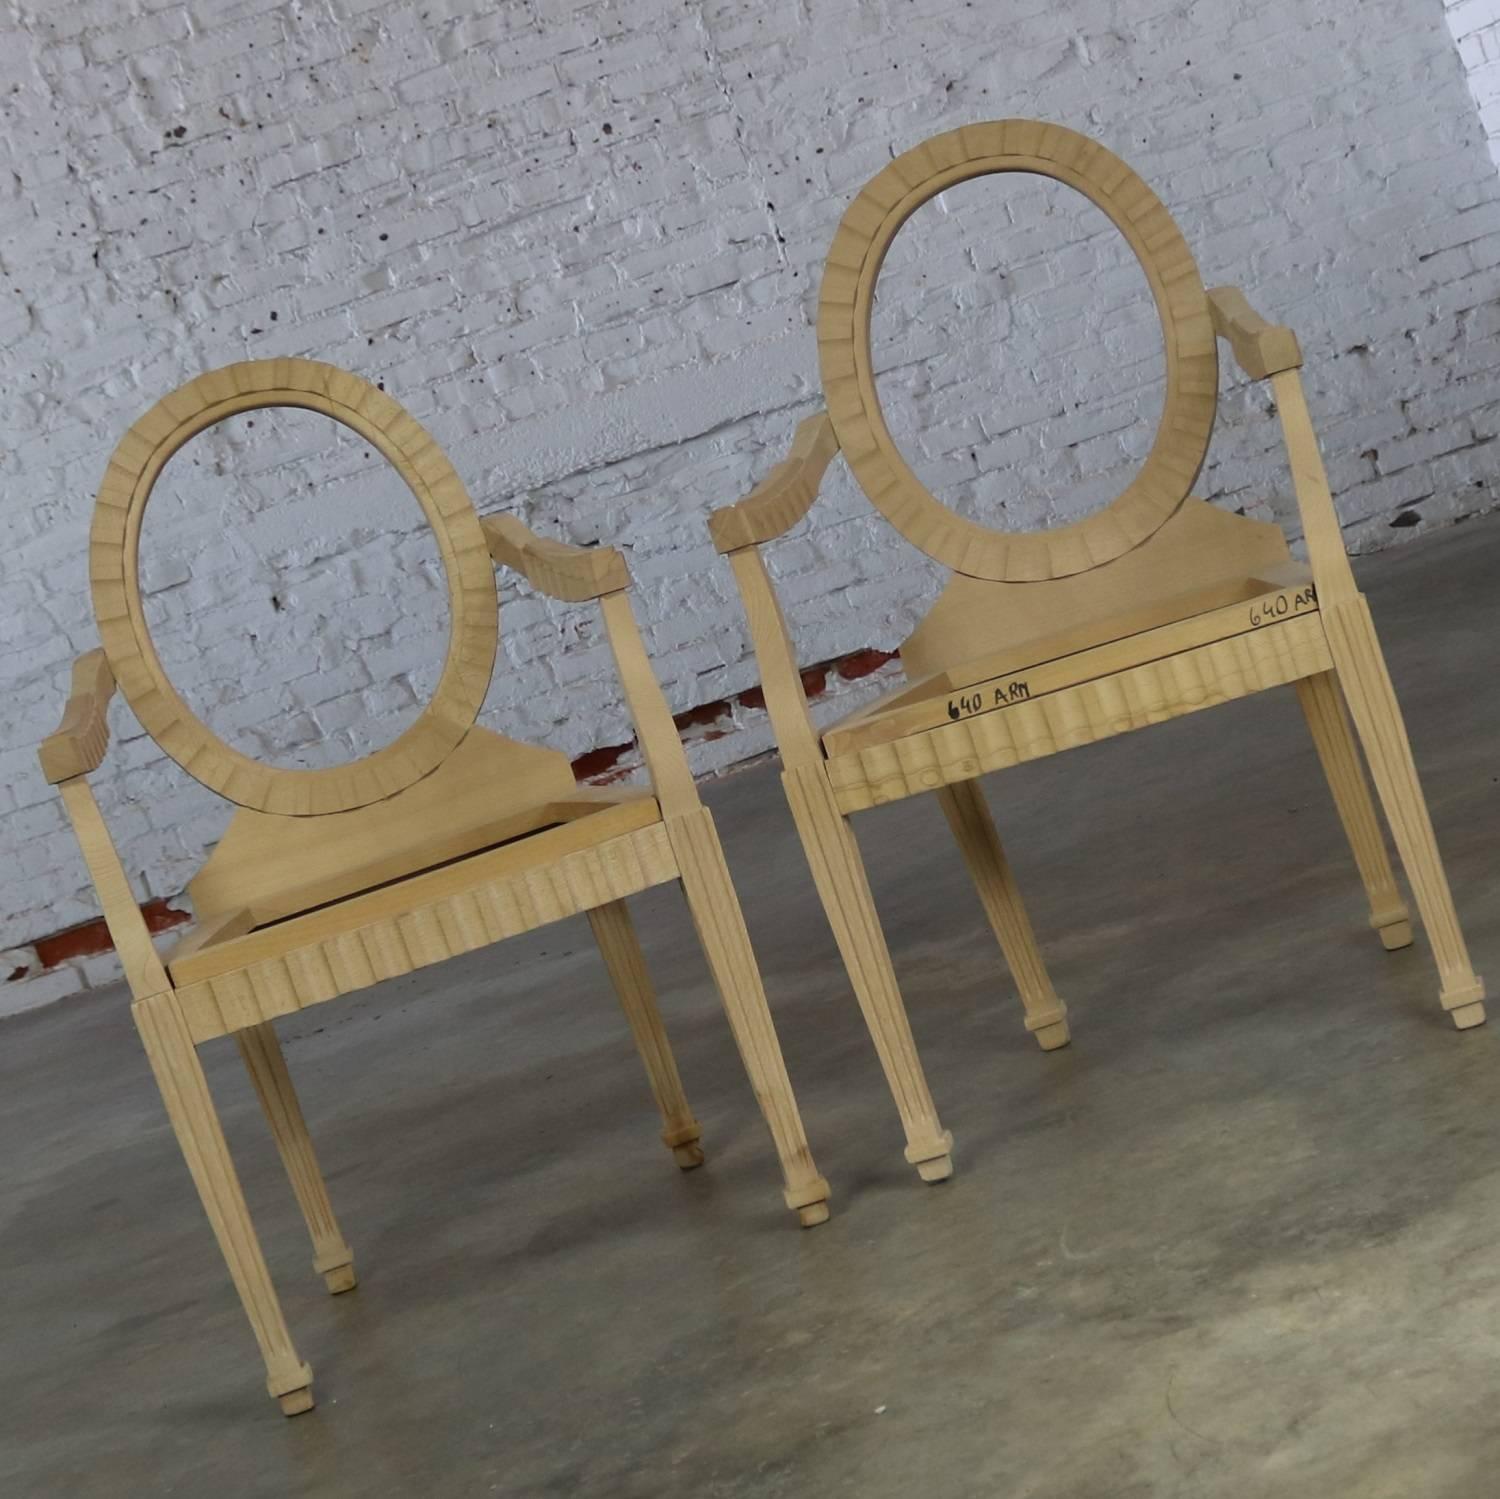 Pair of Donghia style unfinished birch armchair frames ready for you to finish and upholster. They are in ready to finish condition.

Stunning design on this pair of unfinished arm chairs. In the style of Donghia with excellent craftmanship in